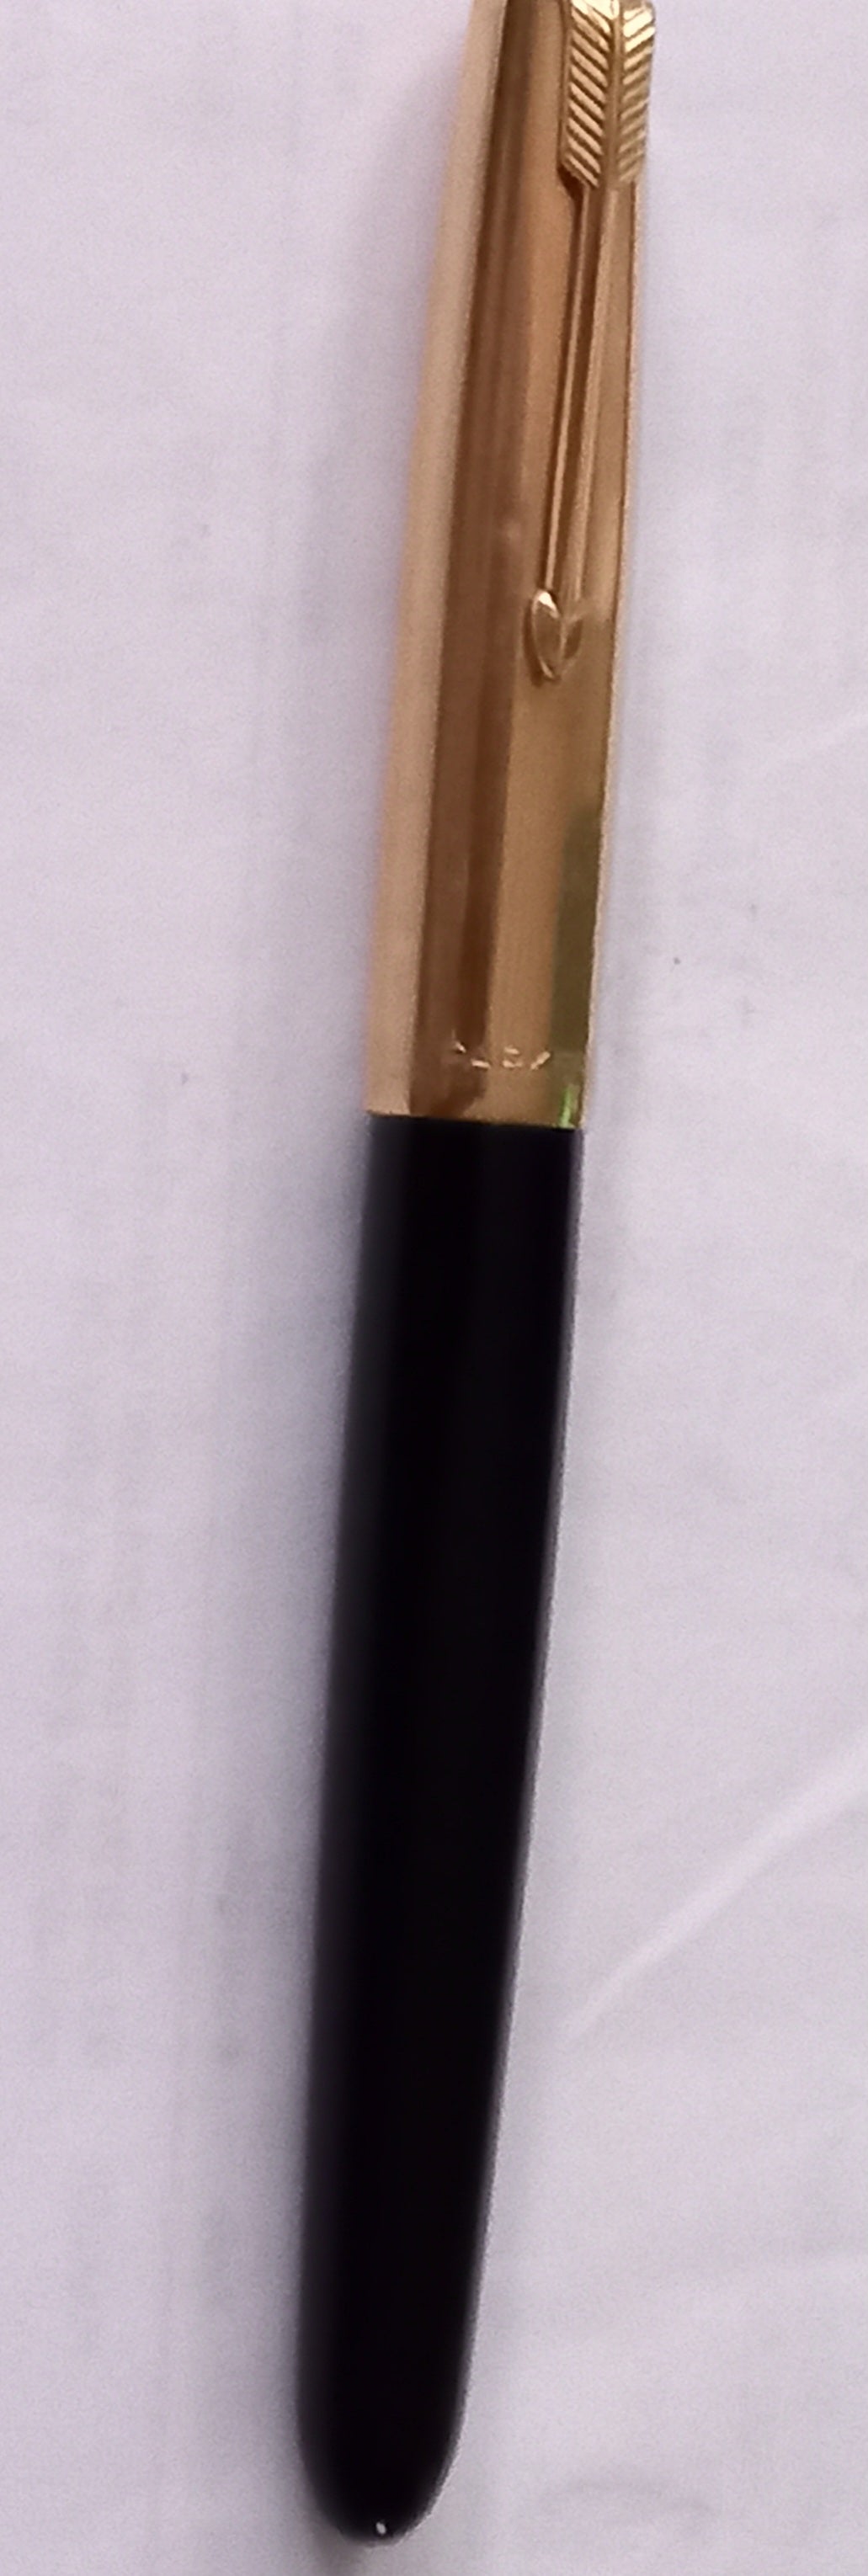 Parker 51 Black Body  and 1/10 12 Ct Gold Cap Fountain Pen